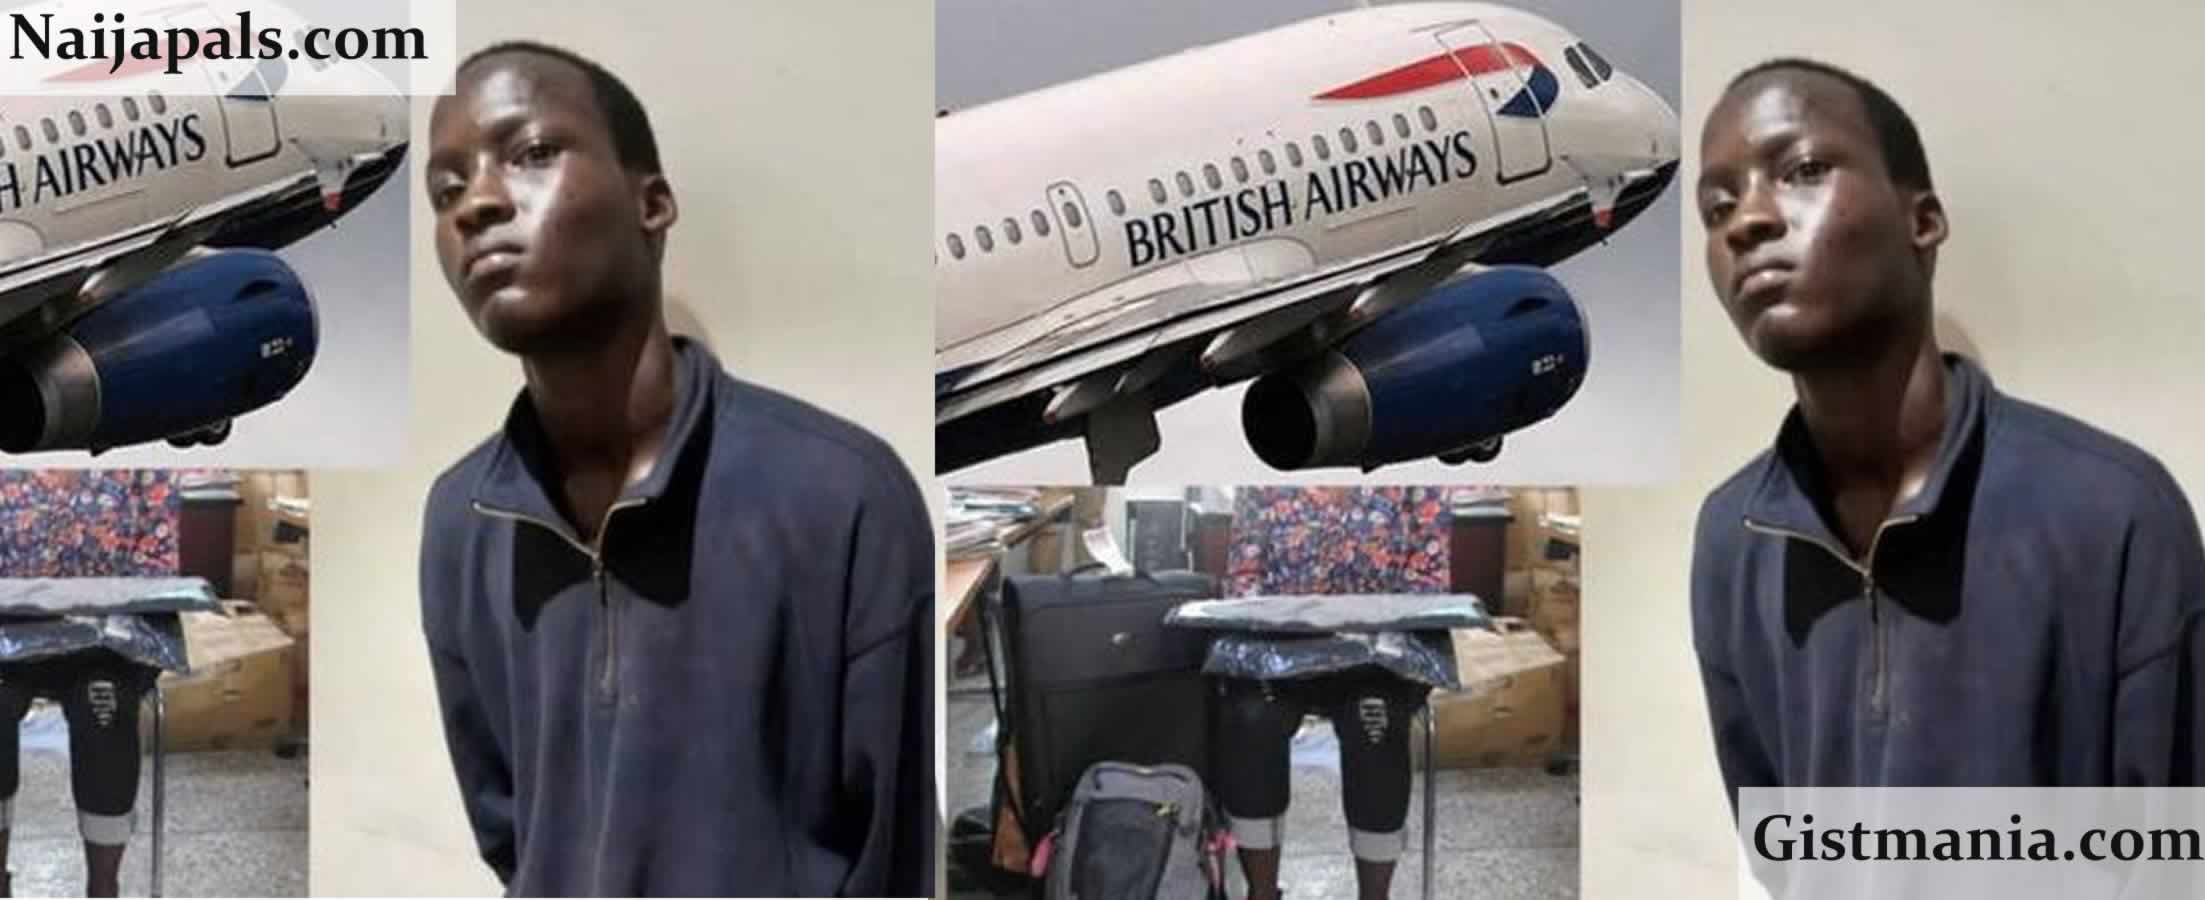 Man Detained For Trying To Sneak Into London-Bound Airplane